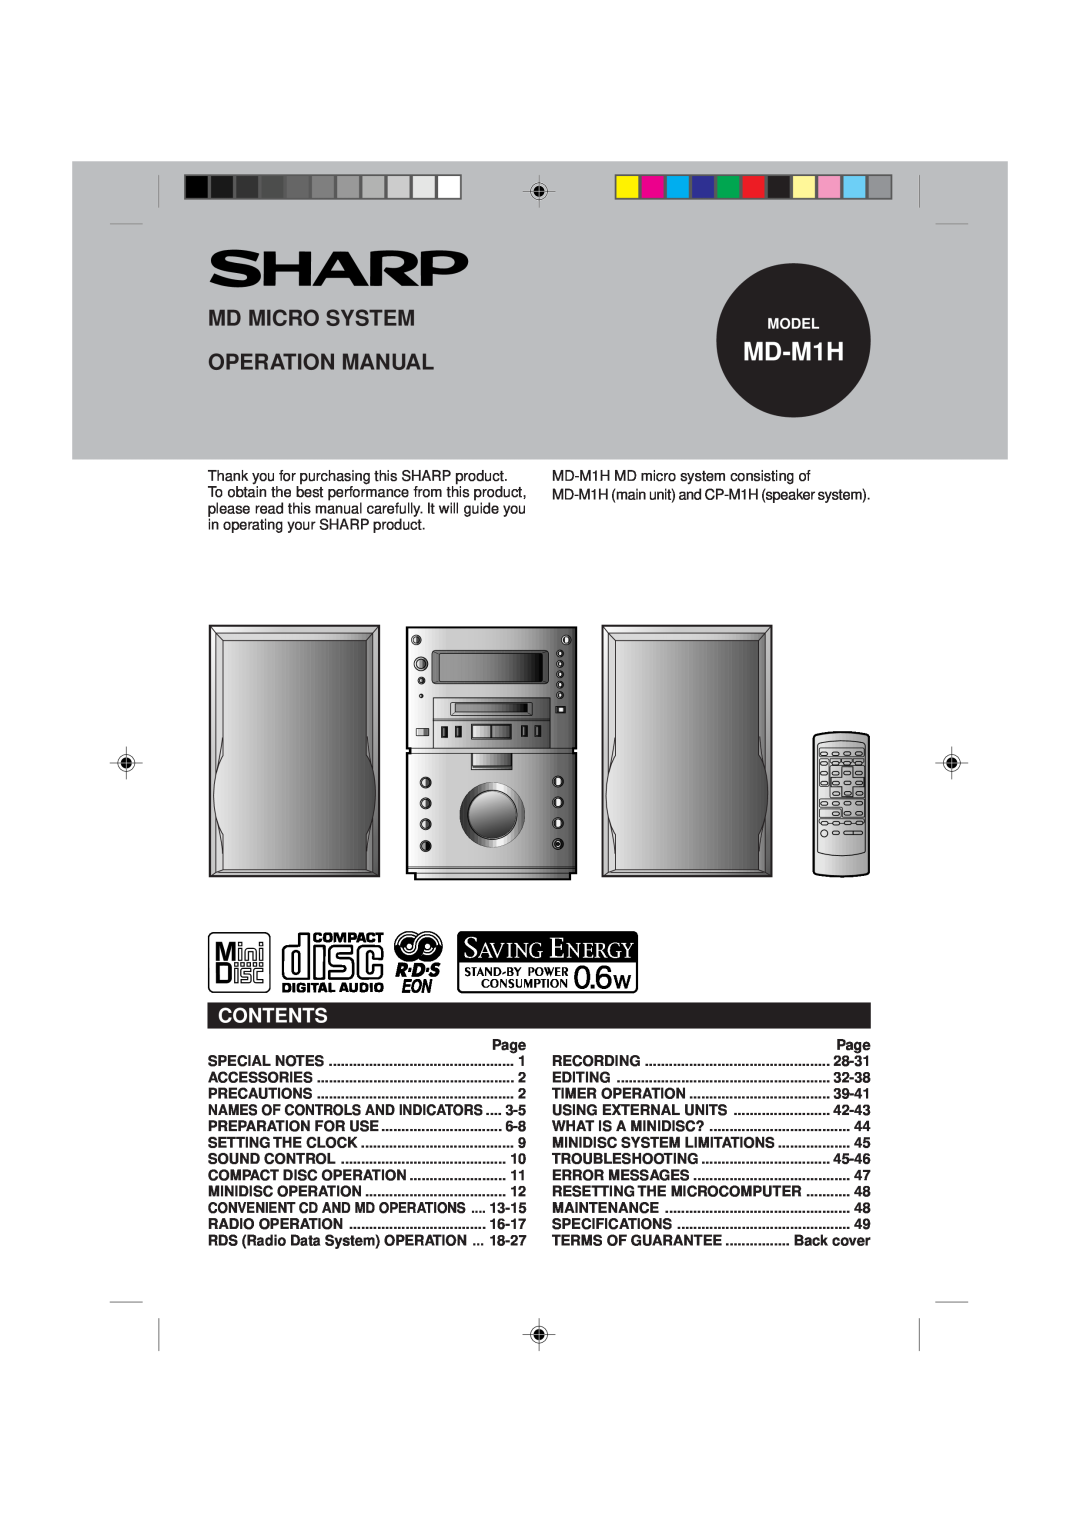 Sharp MD-M1H operation manual Md Micro Systemmodel, Contents 